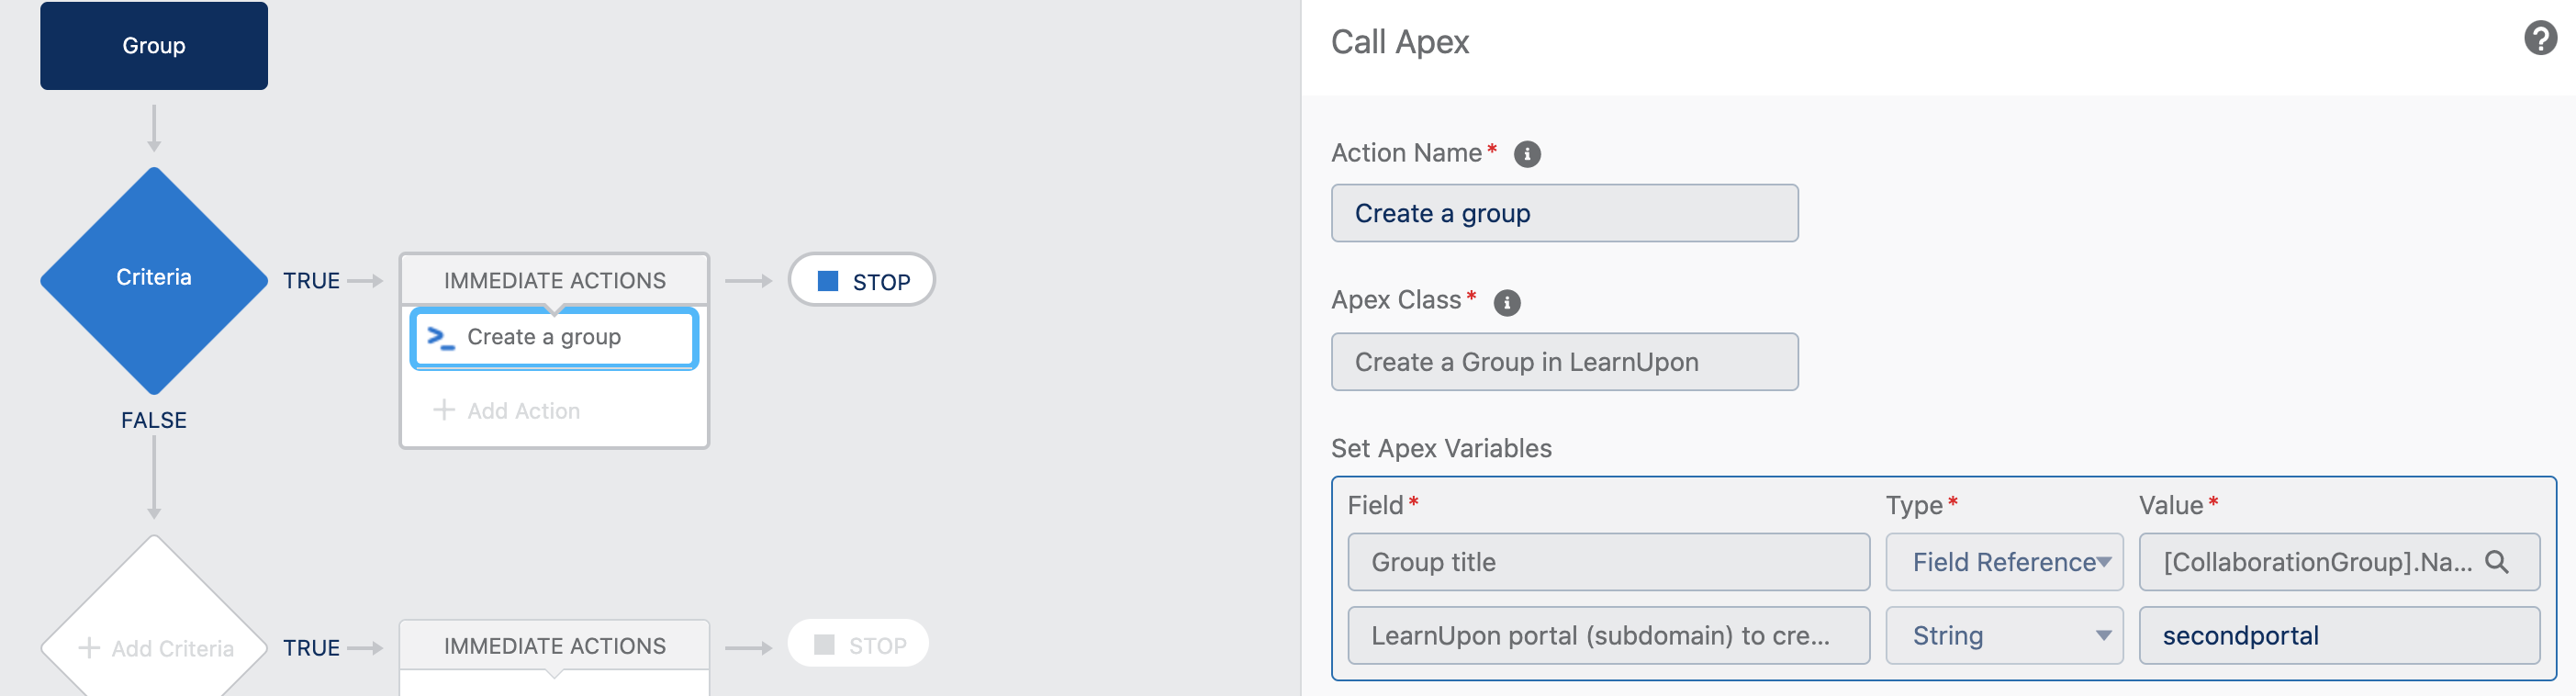 sf_proc_builder_add_action_create_group.png